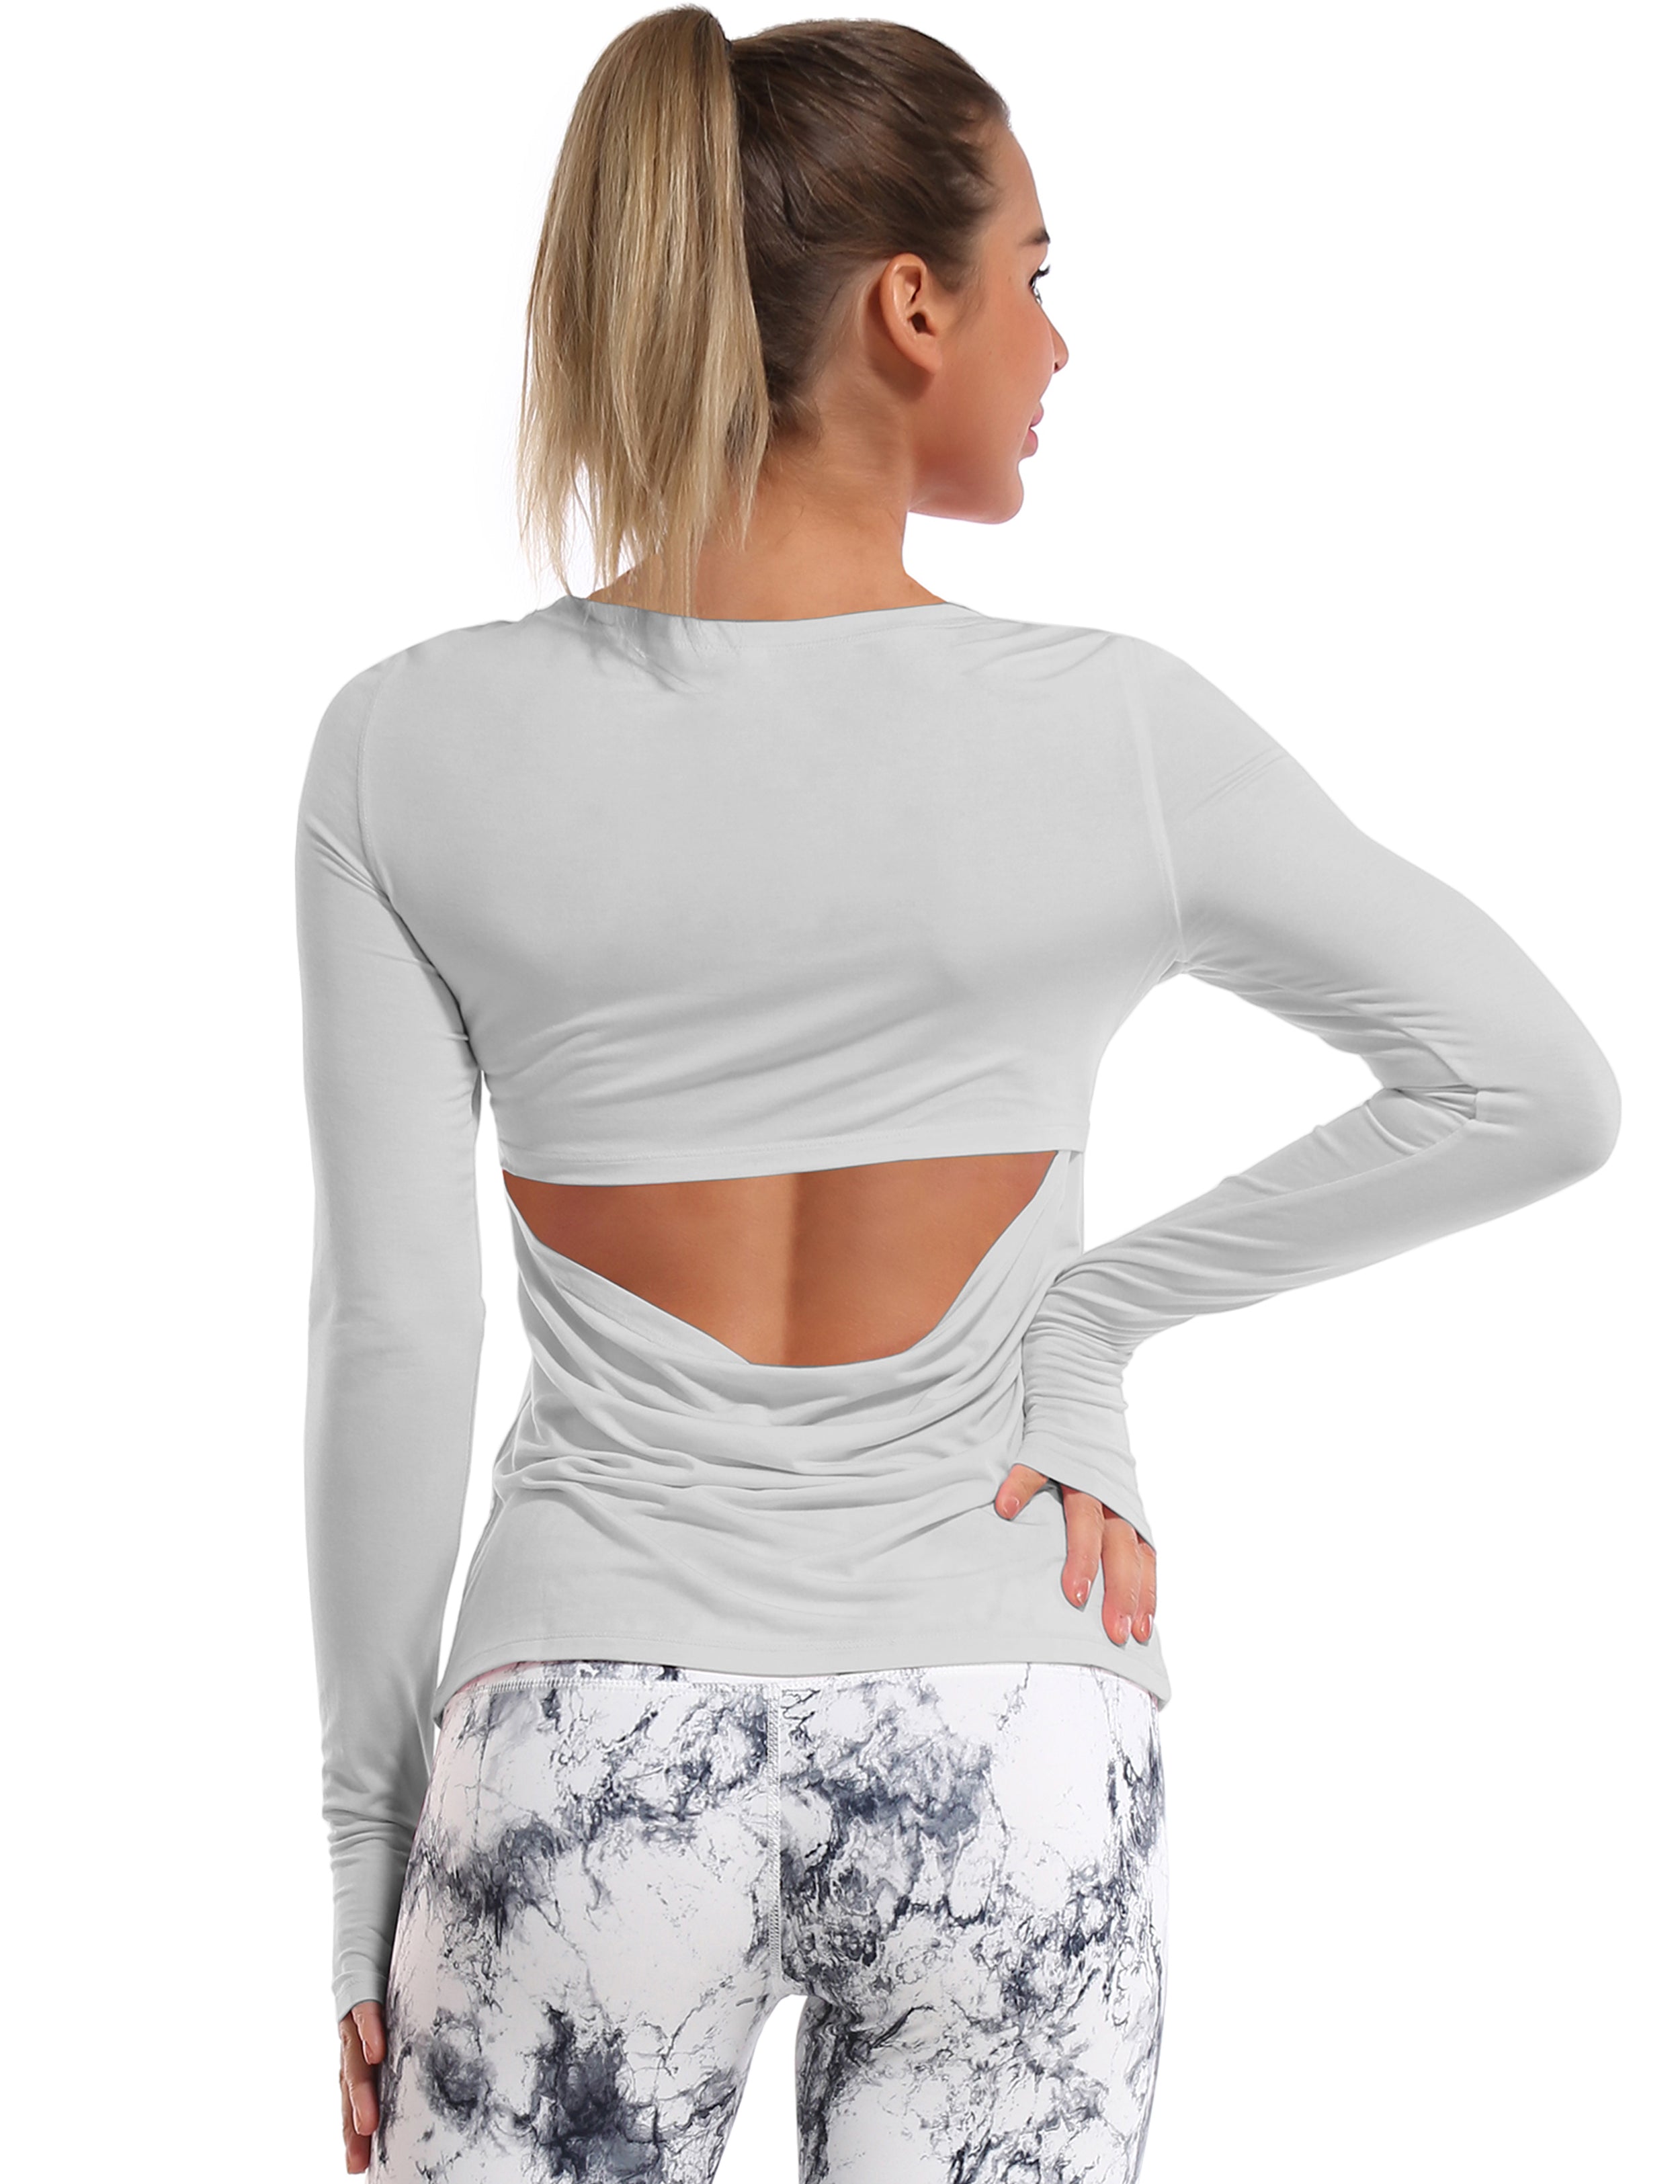 Open Back Long Sleeve Tops lightgray Designed for On the Move Slim fit 93%Modal/7%Spandex Four-way stretch Naturally breathable Super-Soft, Modal Fabric